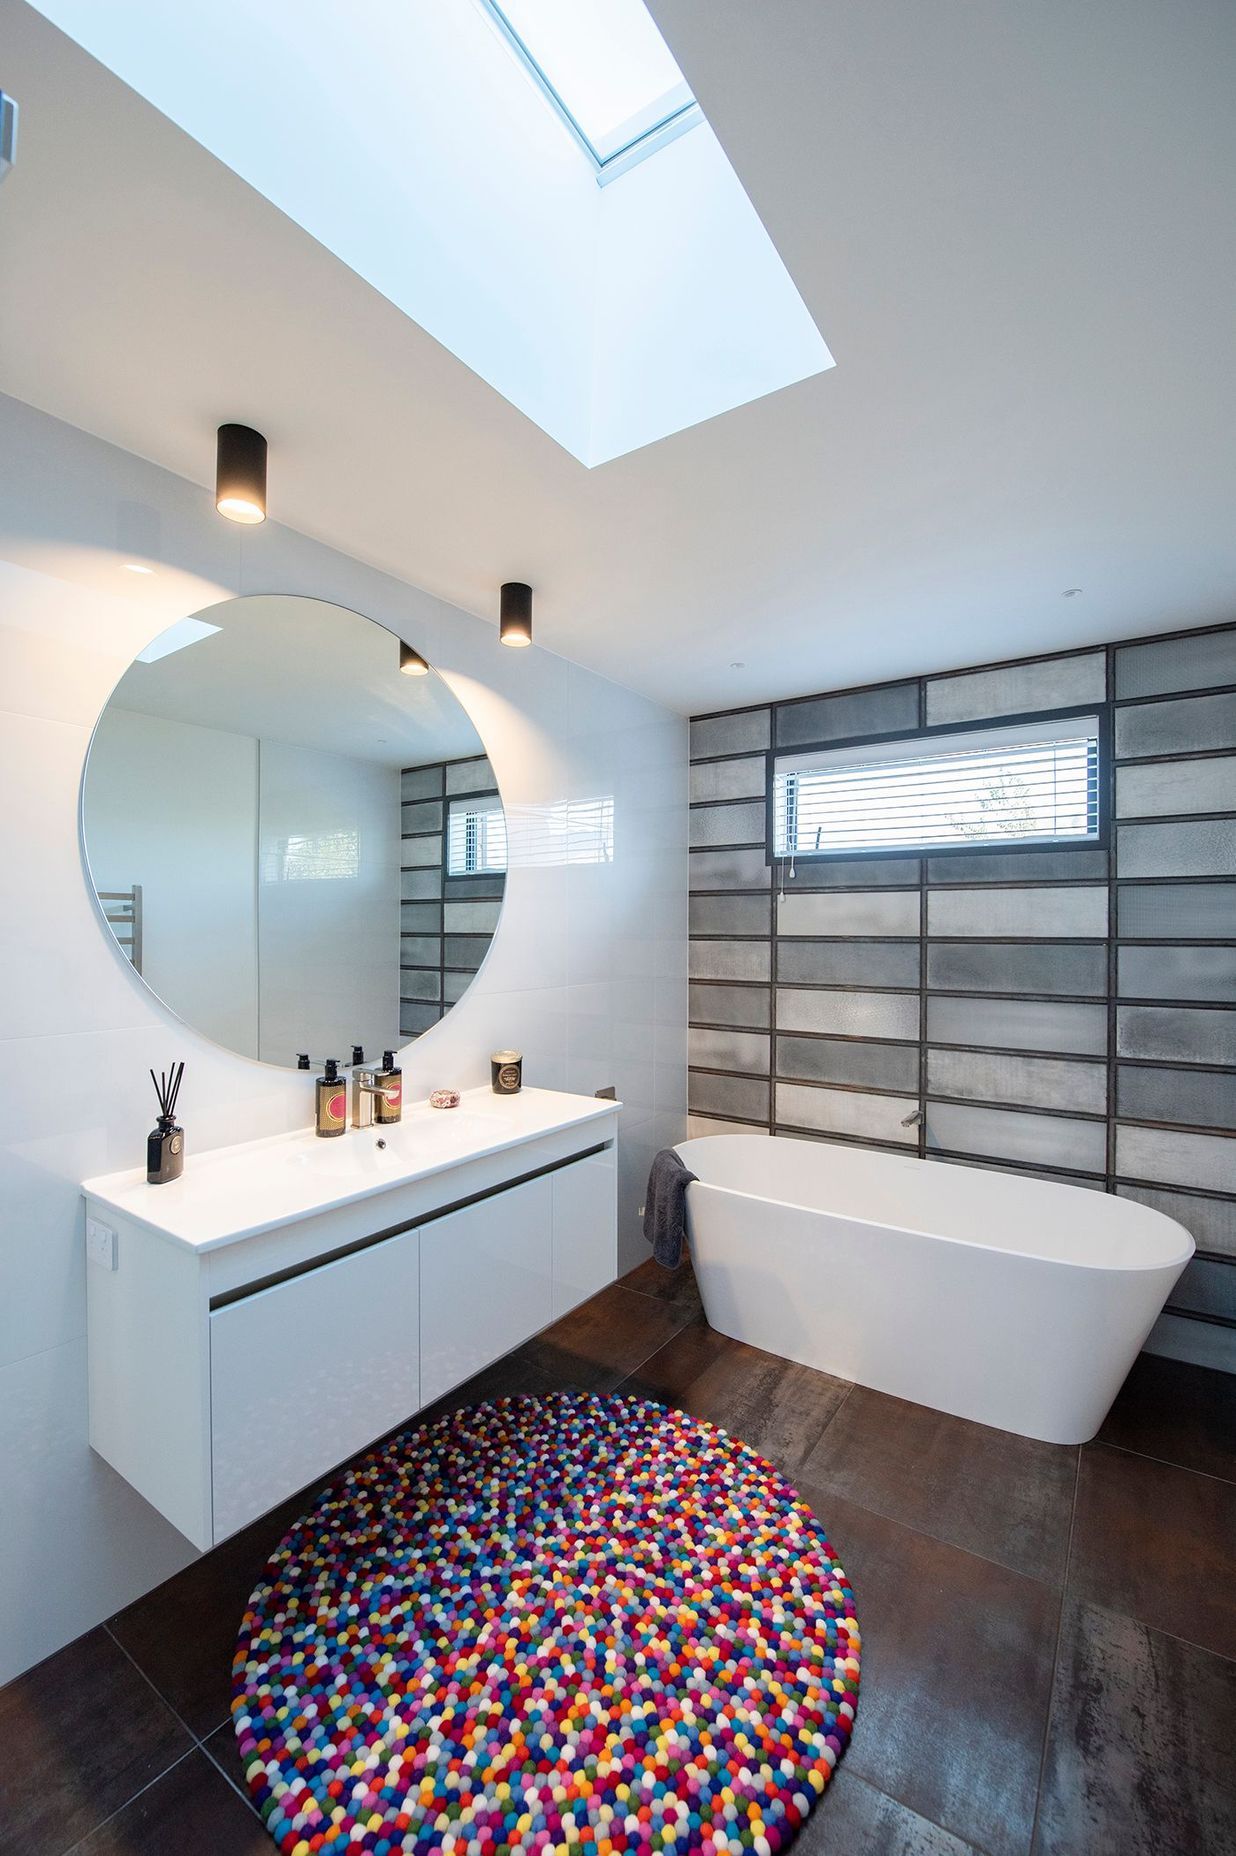 A Vertralla II freestanding bath takes centrestage in this bathroom where Corten A floor tiles pick up on the weathered kitchen splashback and Absolute Bianco wall tiles have the look of concrete.